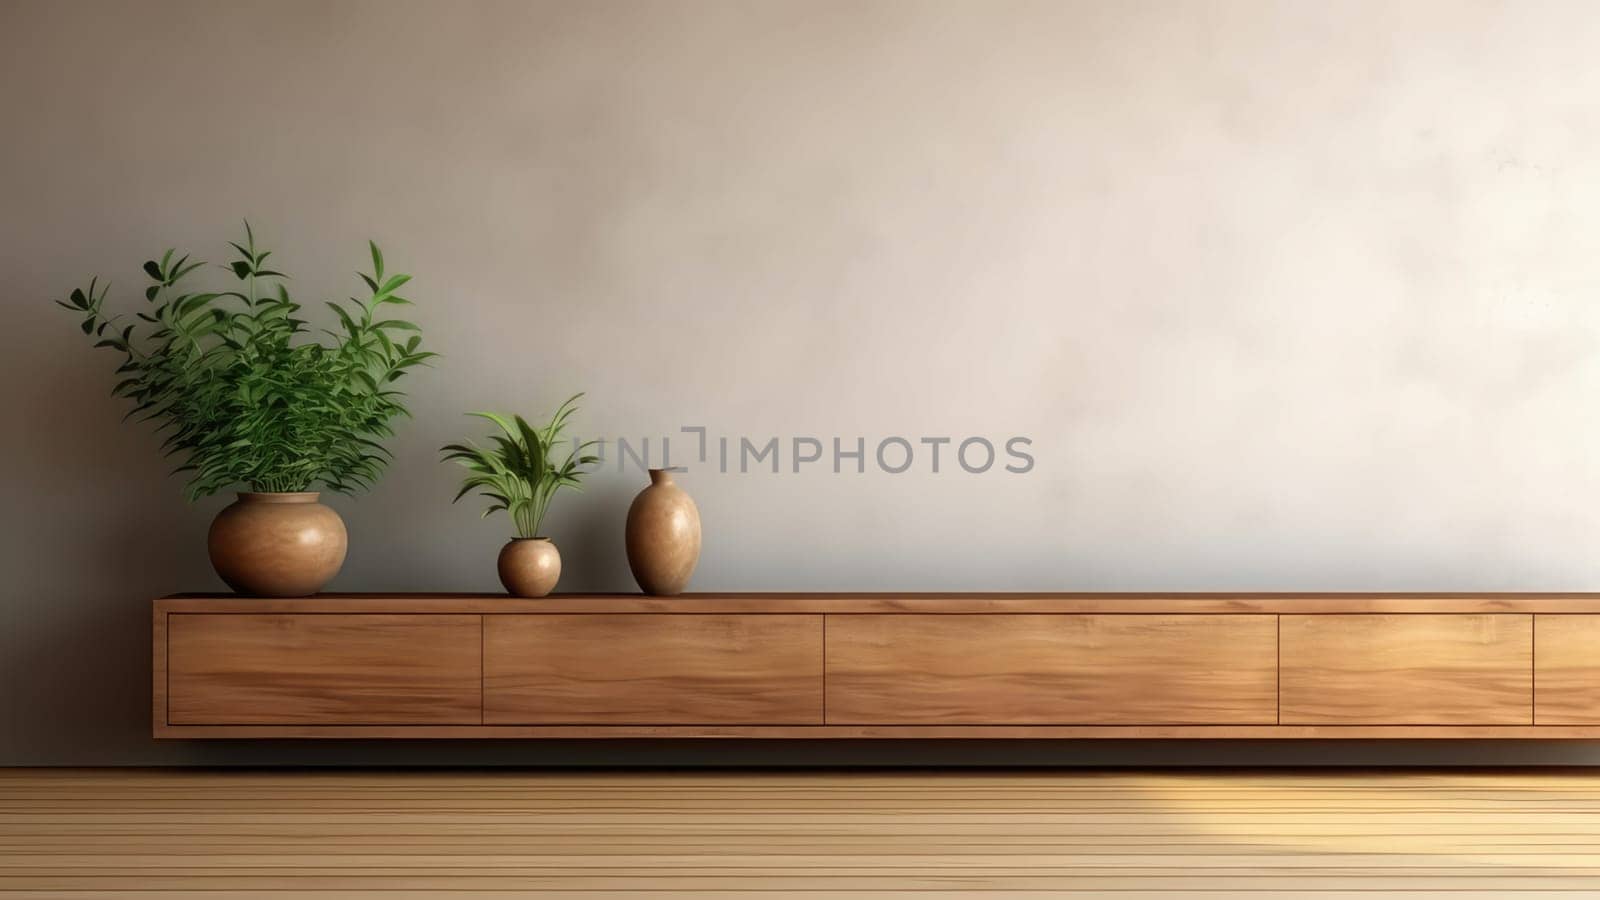 3D rendering of a potted plant, built-in wooden shelving on concrete wall background in living room. The room is decorated in a cozy and hospitality style.